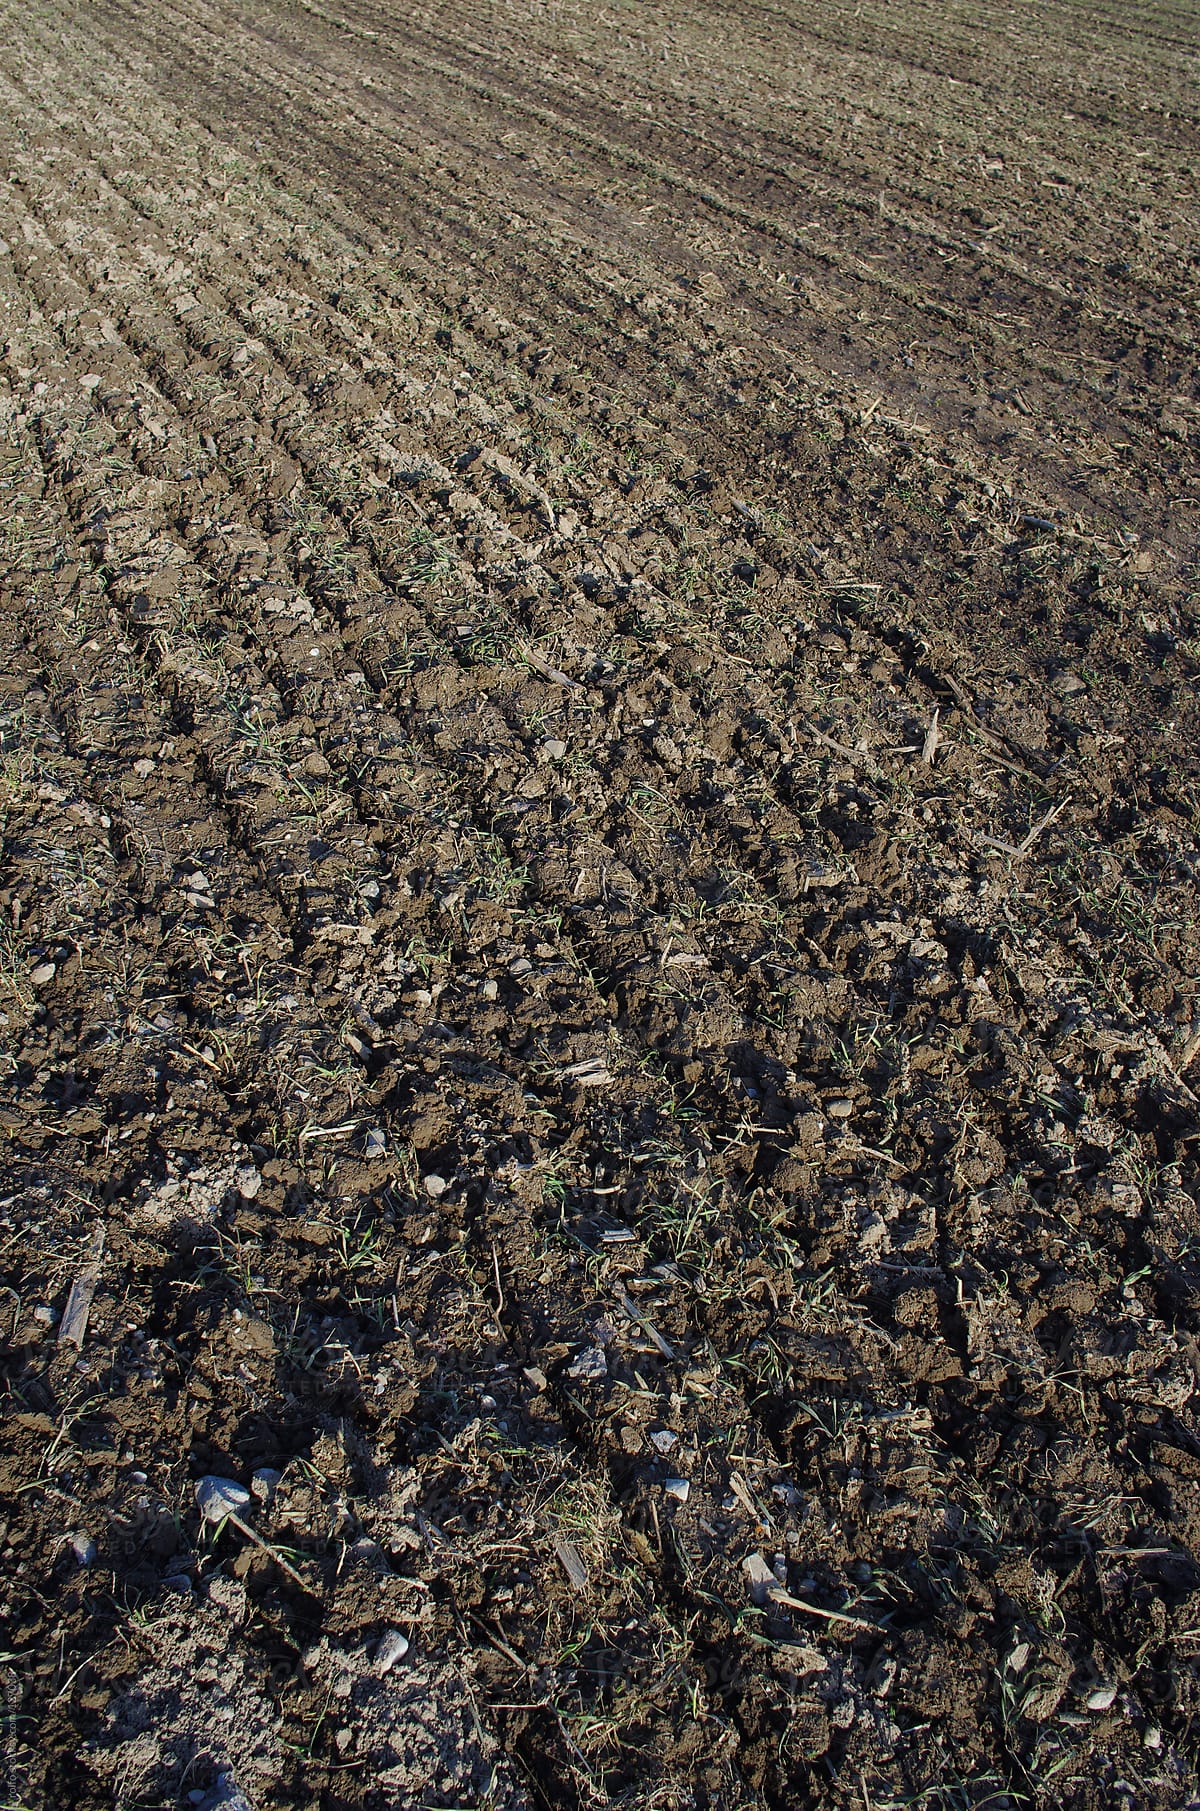 Newly ploughed agricultural field